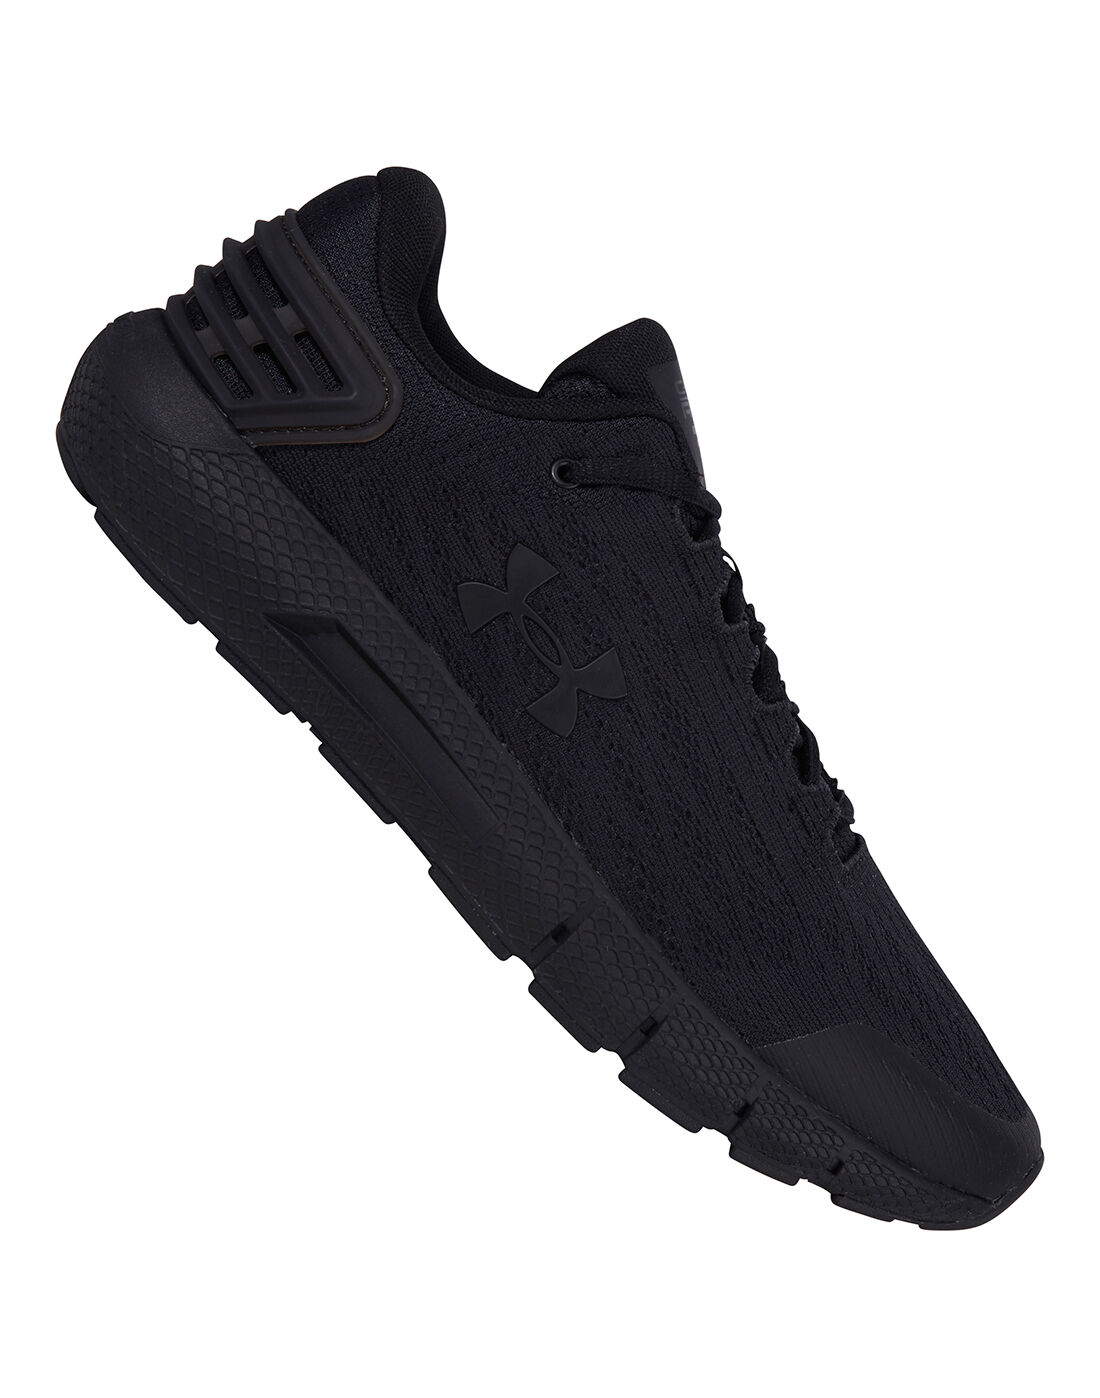 under armour charged rogue men's running shoes